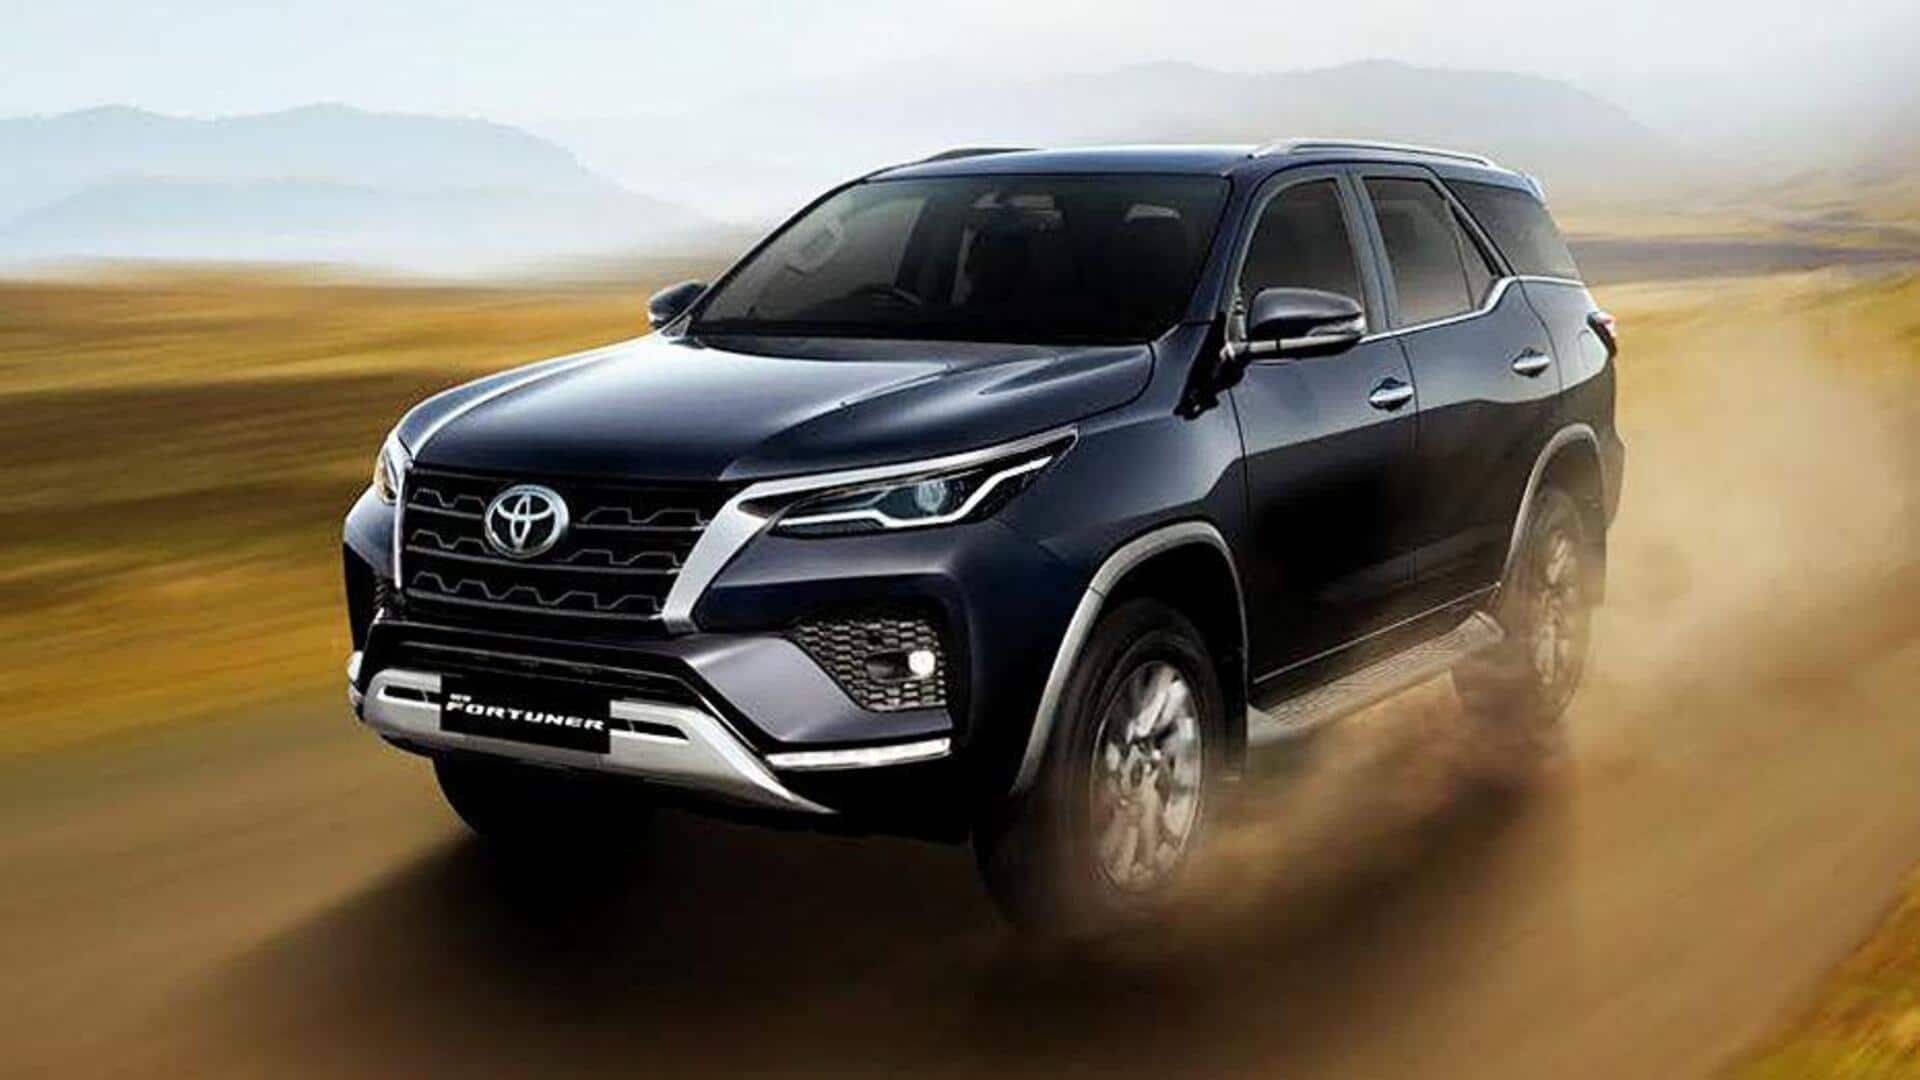 Toyota Fortuner gets 'Leader Edition' variant in India: Check features